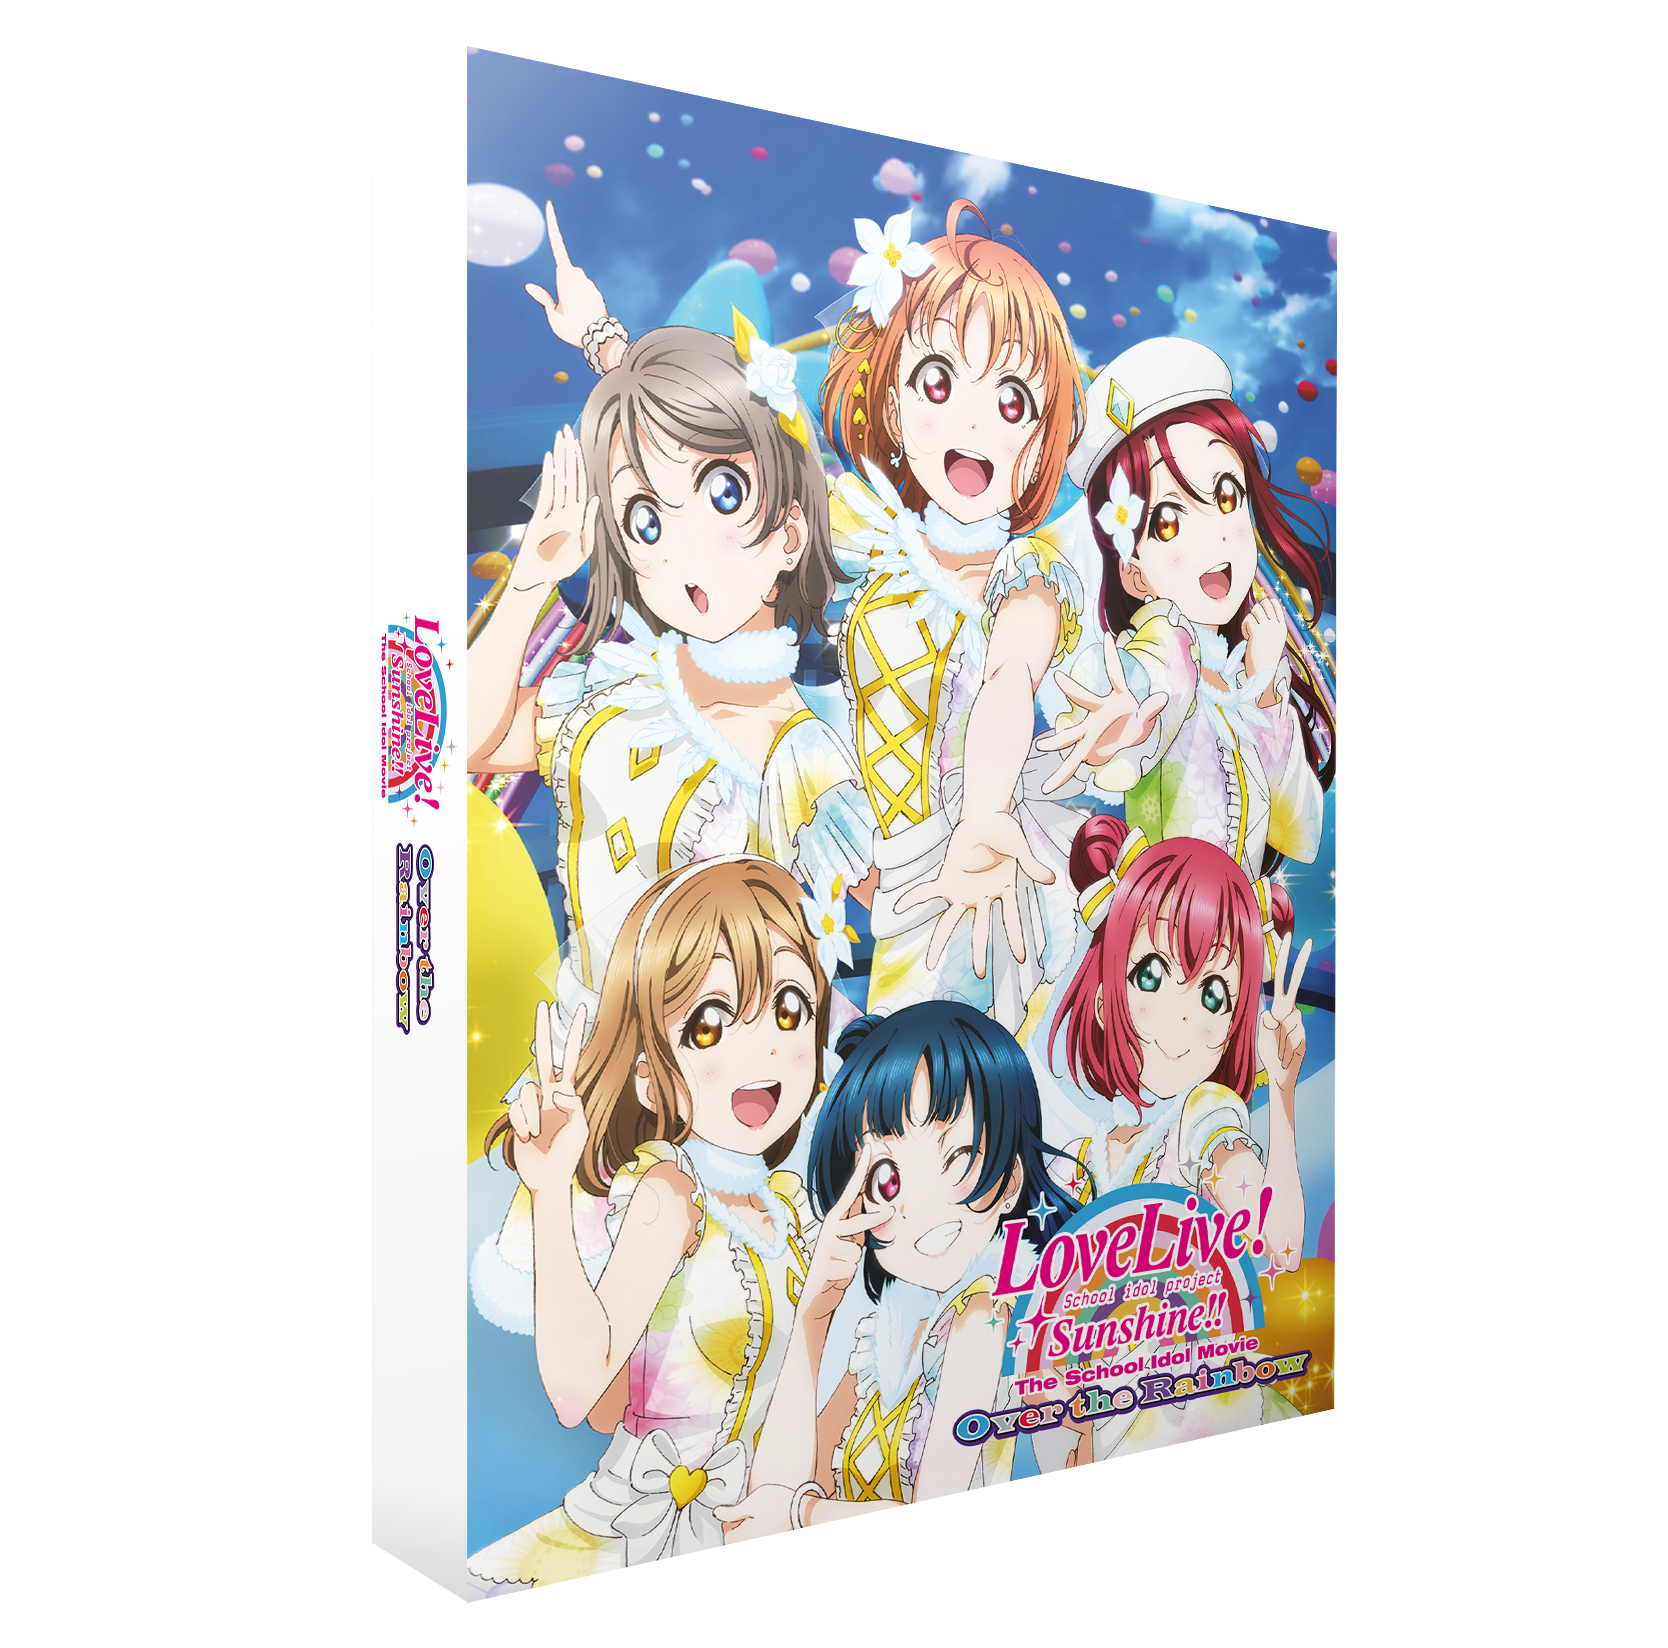 Love Live! Sunshine!! Over the Rainbow - Blu-ray Collector's Edition